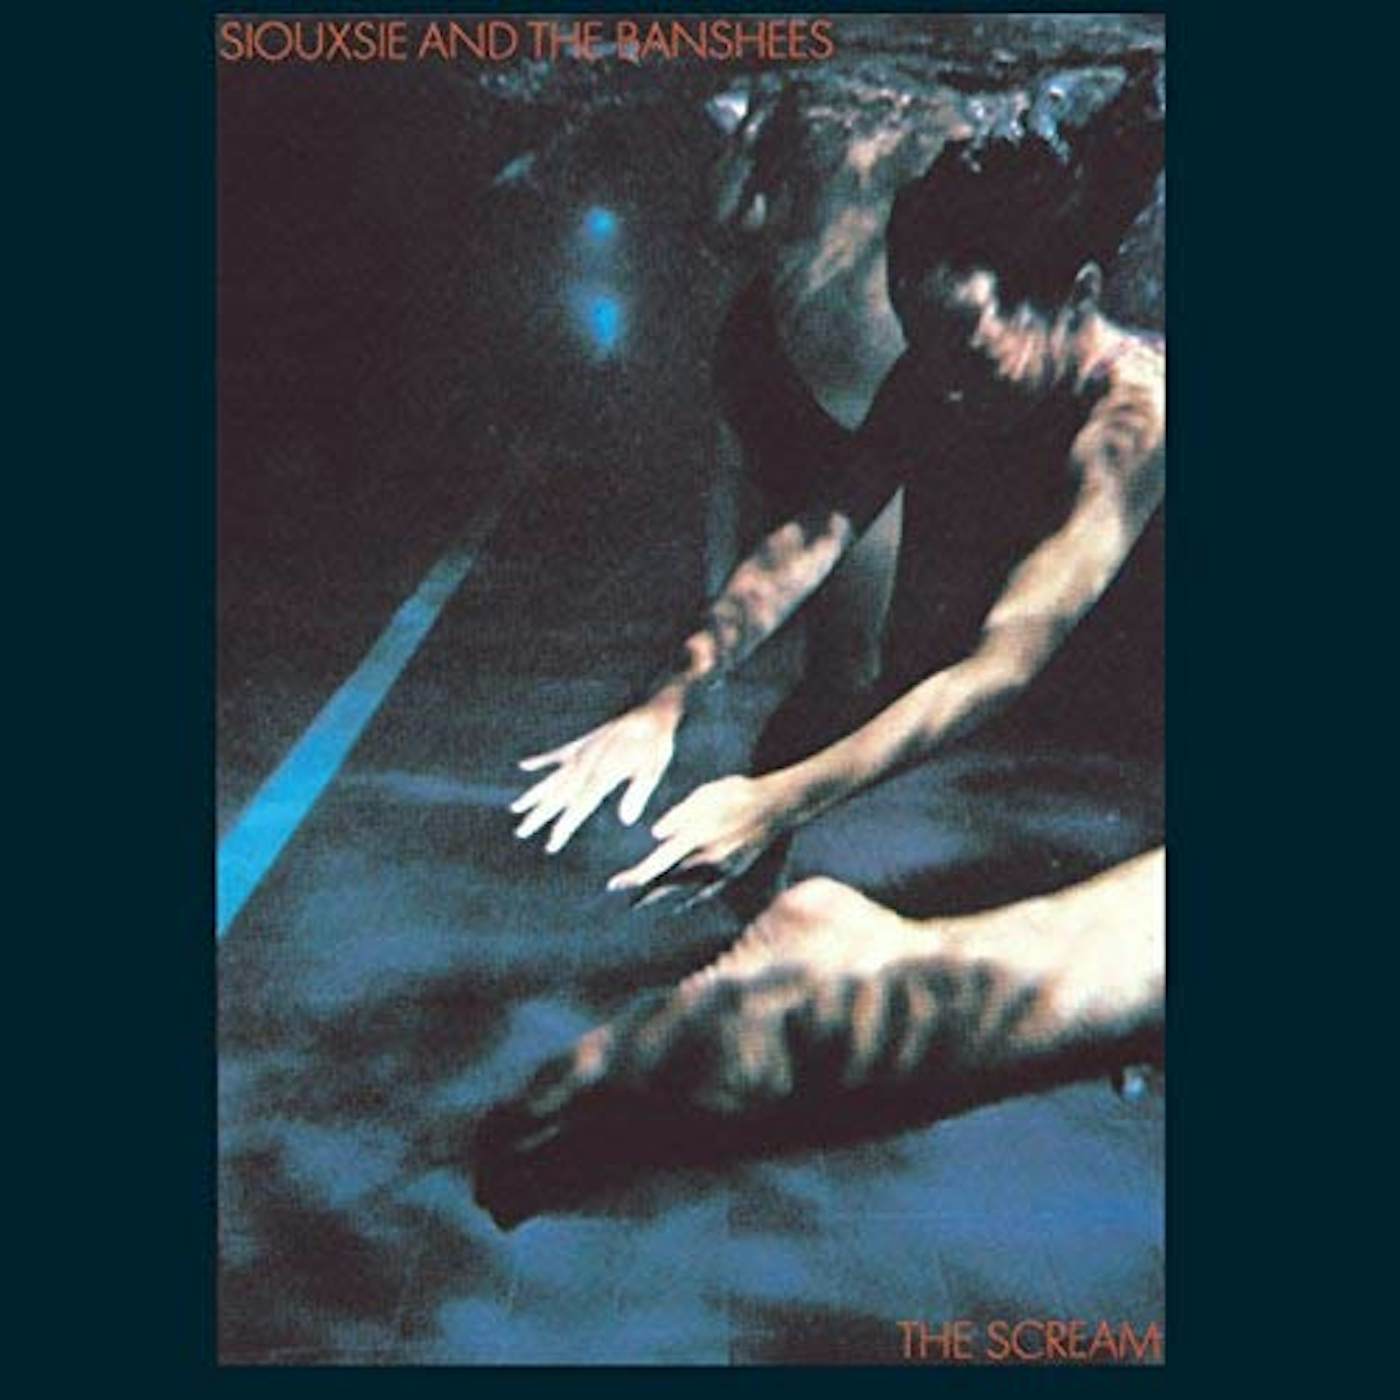 Siouxsie and the Banshees SCREAM Vinyl Record